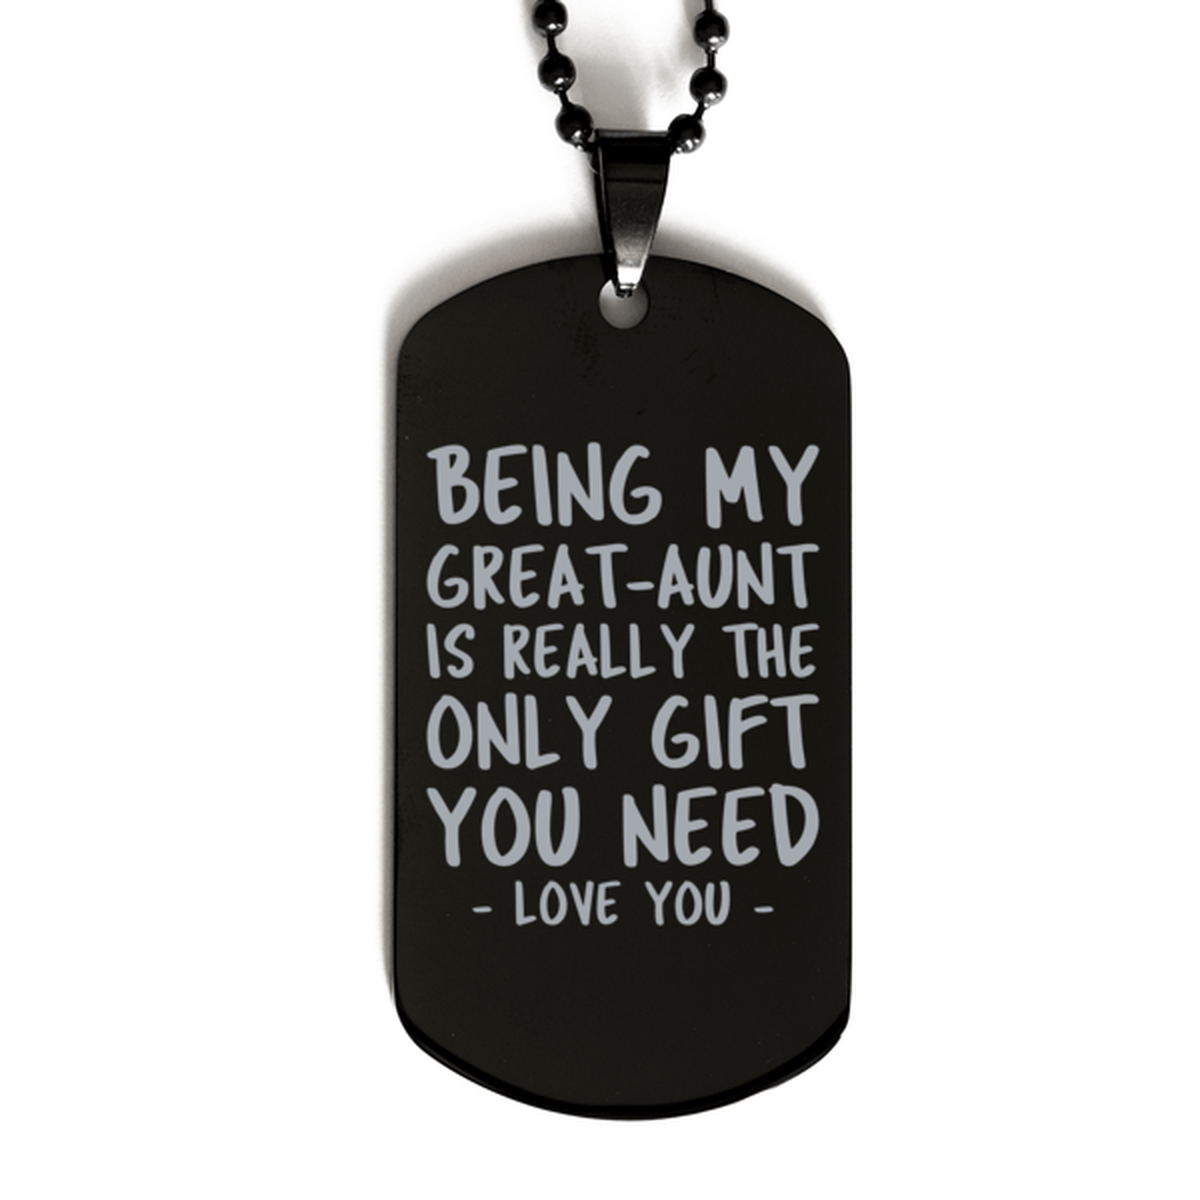 Funny Great-aunt Black Dog Tag Necklace, Being My Great-aunt Is Really the Only Gift You Need, Best Birthday Gifts for Great-aunt